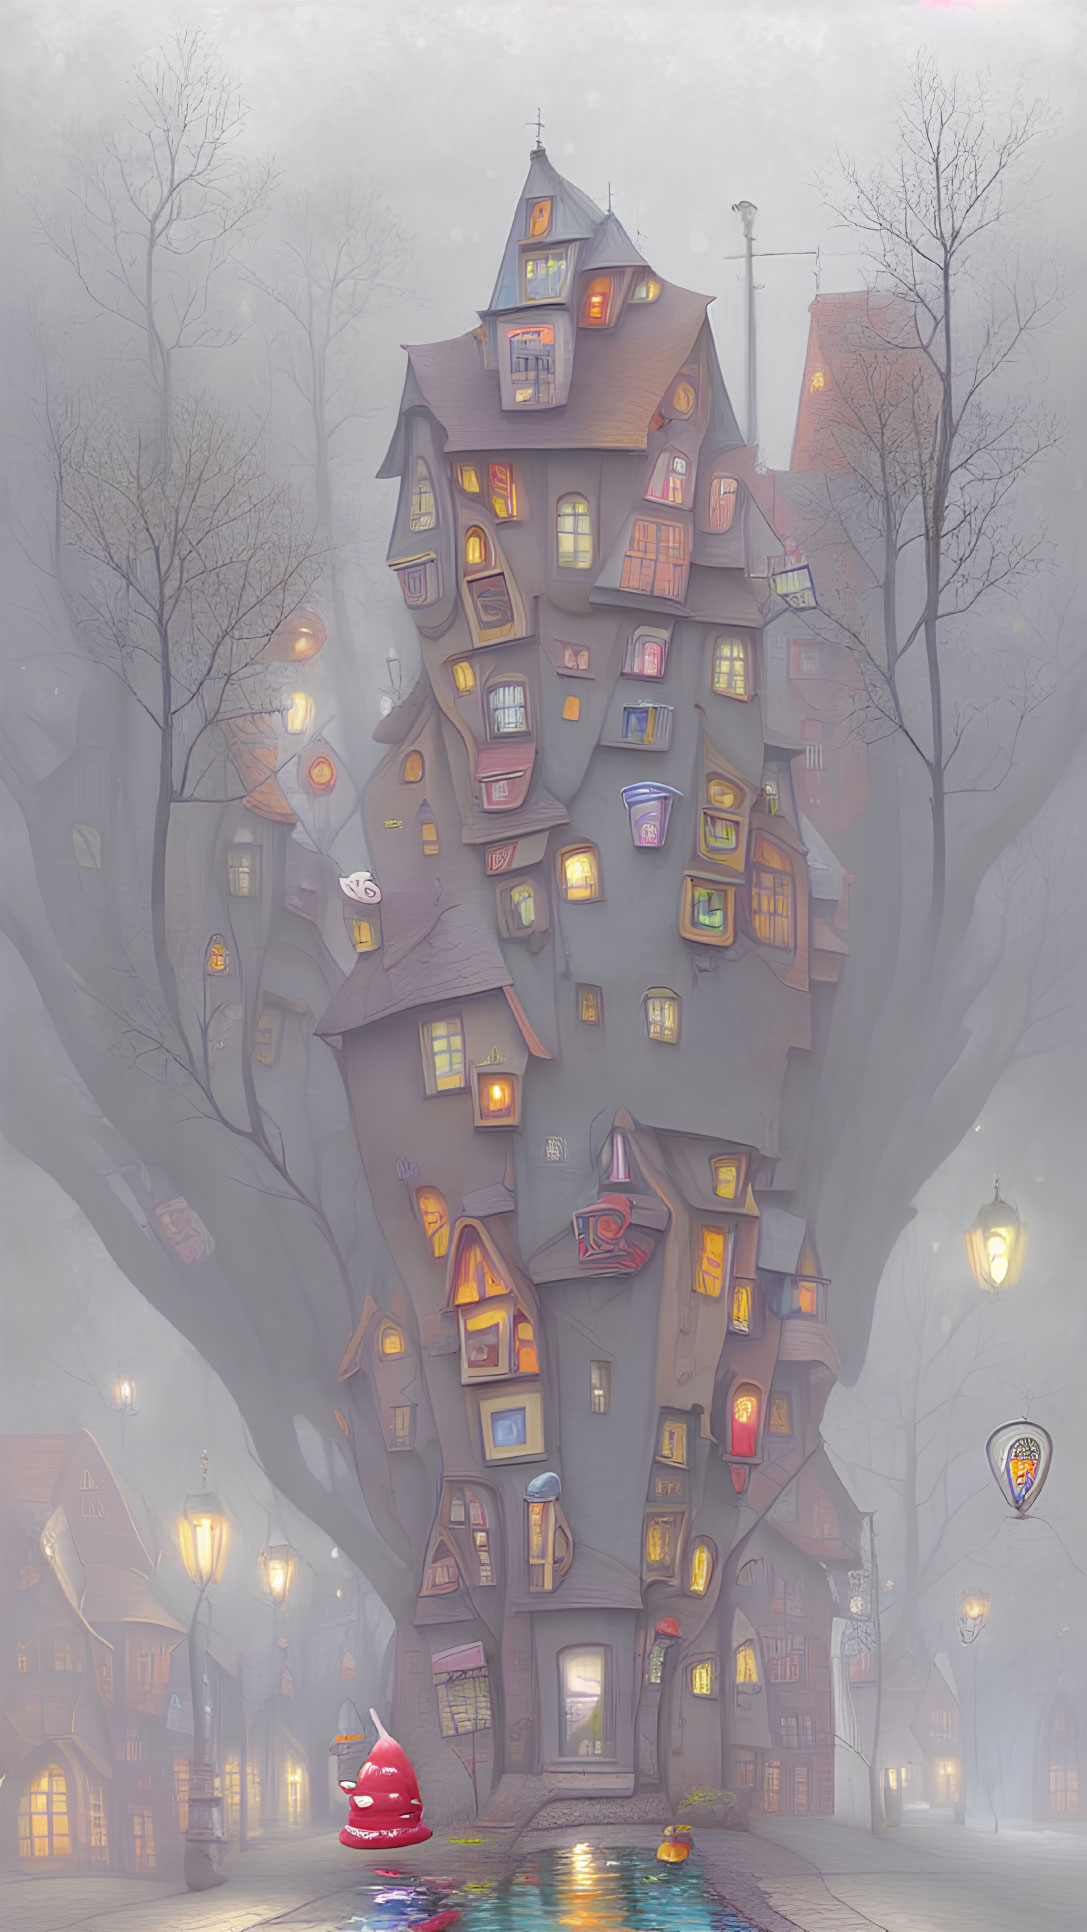 Misty ambiance: Glowing treehouse with red car